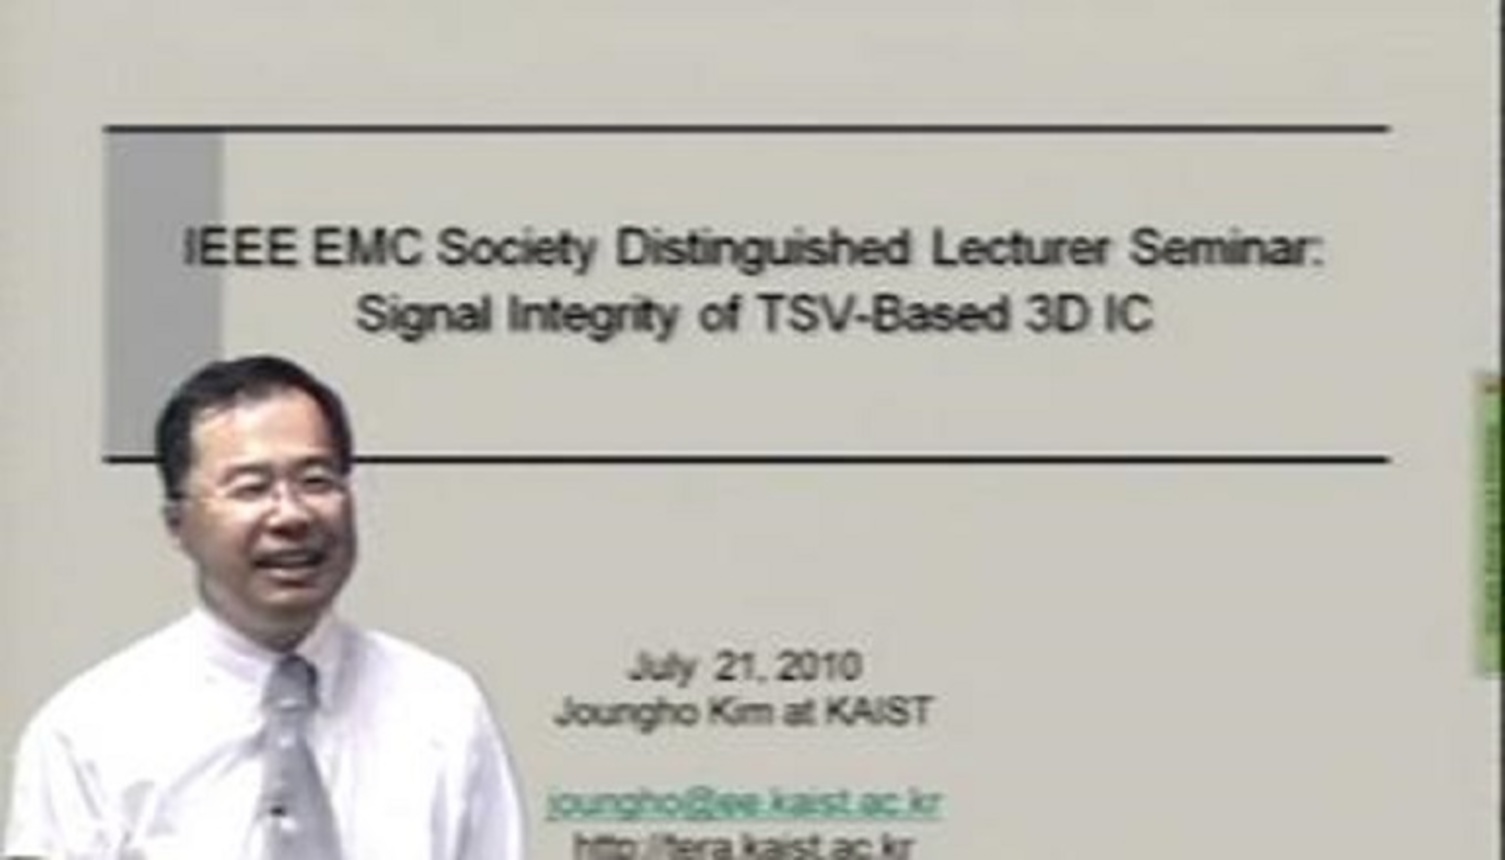 Signal Integrity of TSV-based 3D IC Video